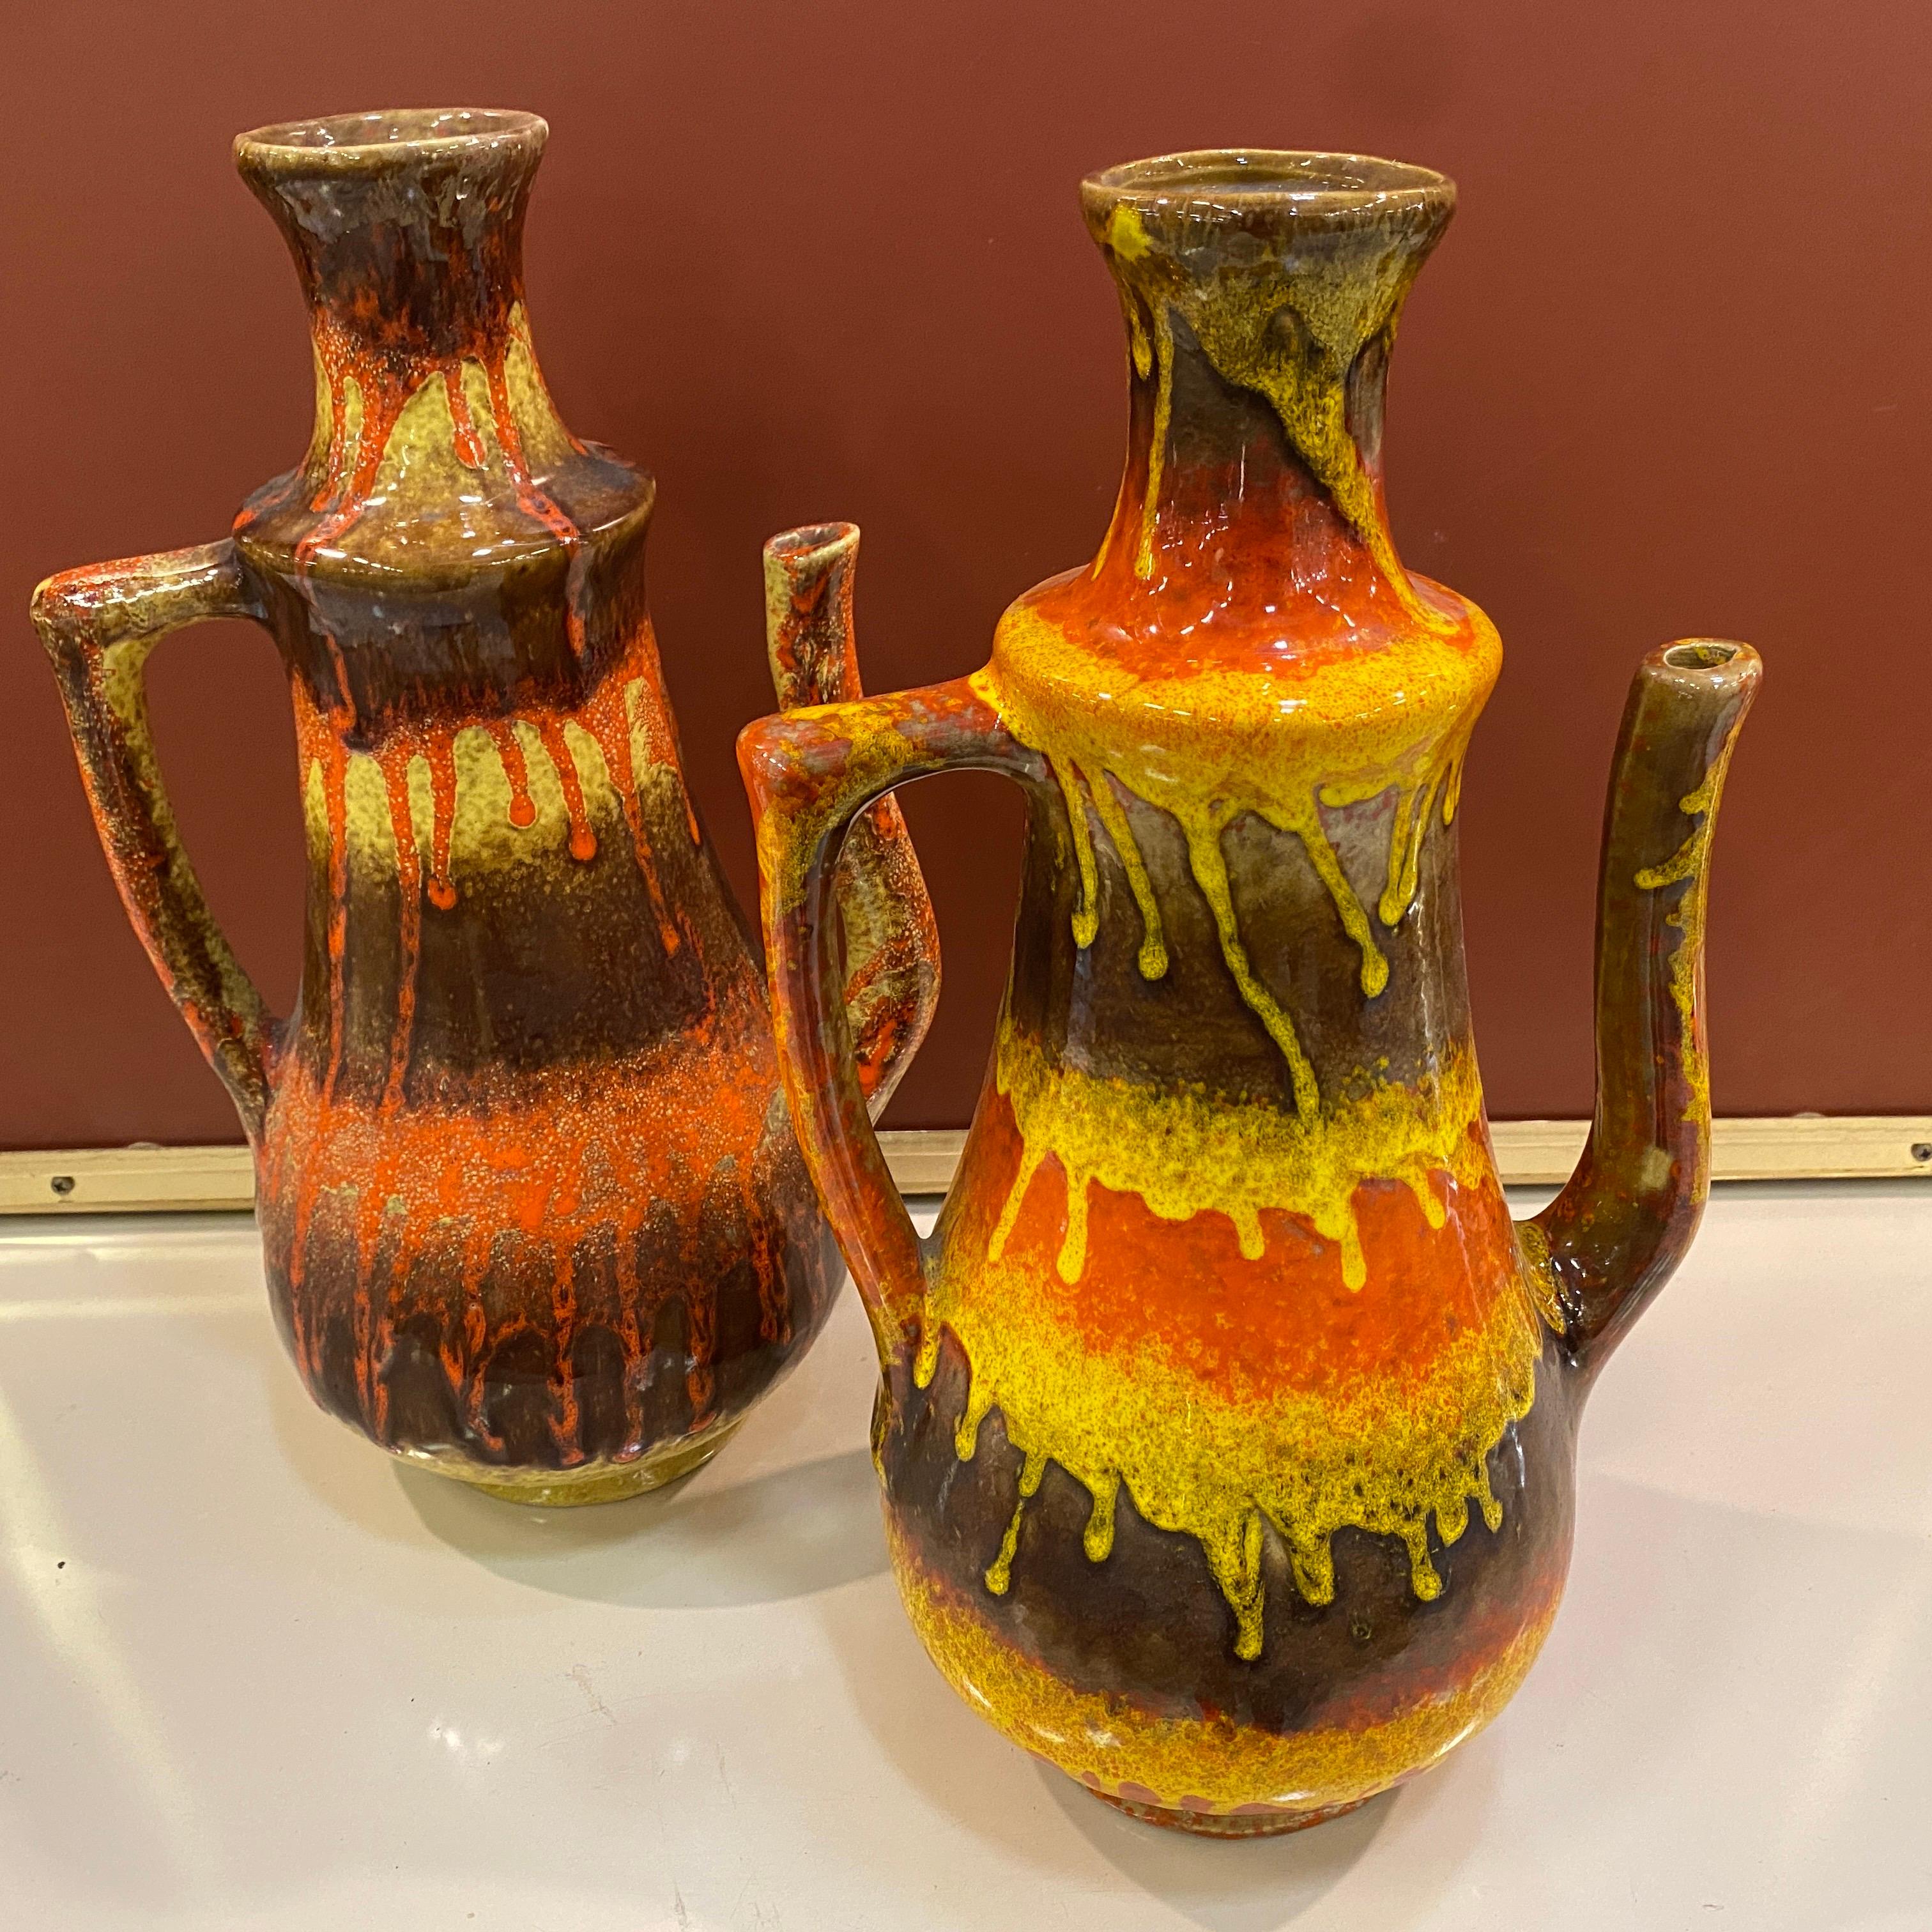 Two multi colored ceramic huge jugs designed and hand-crafted in Italy by ceramica Artigiana Umbra, small manufacturer founded in 1956 in Città di Castello. They are in perfect conditions.